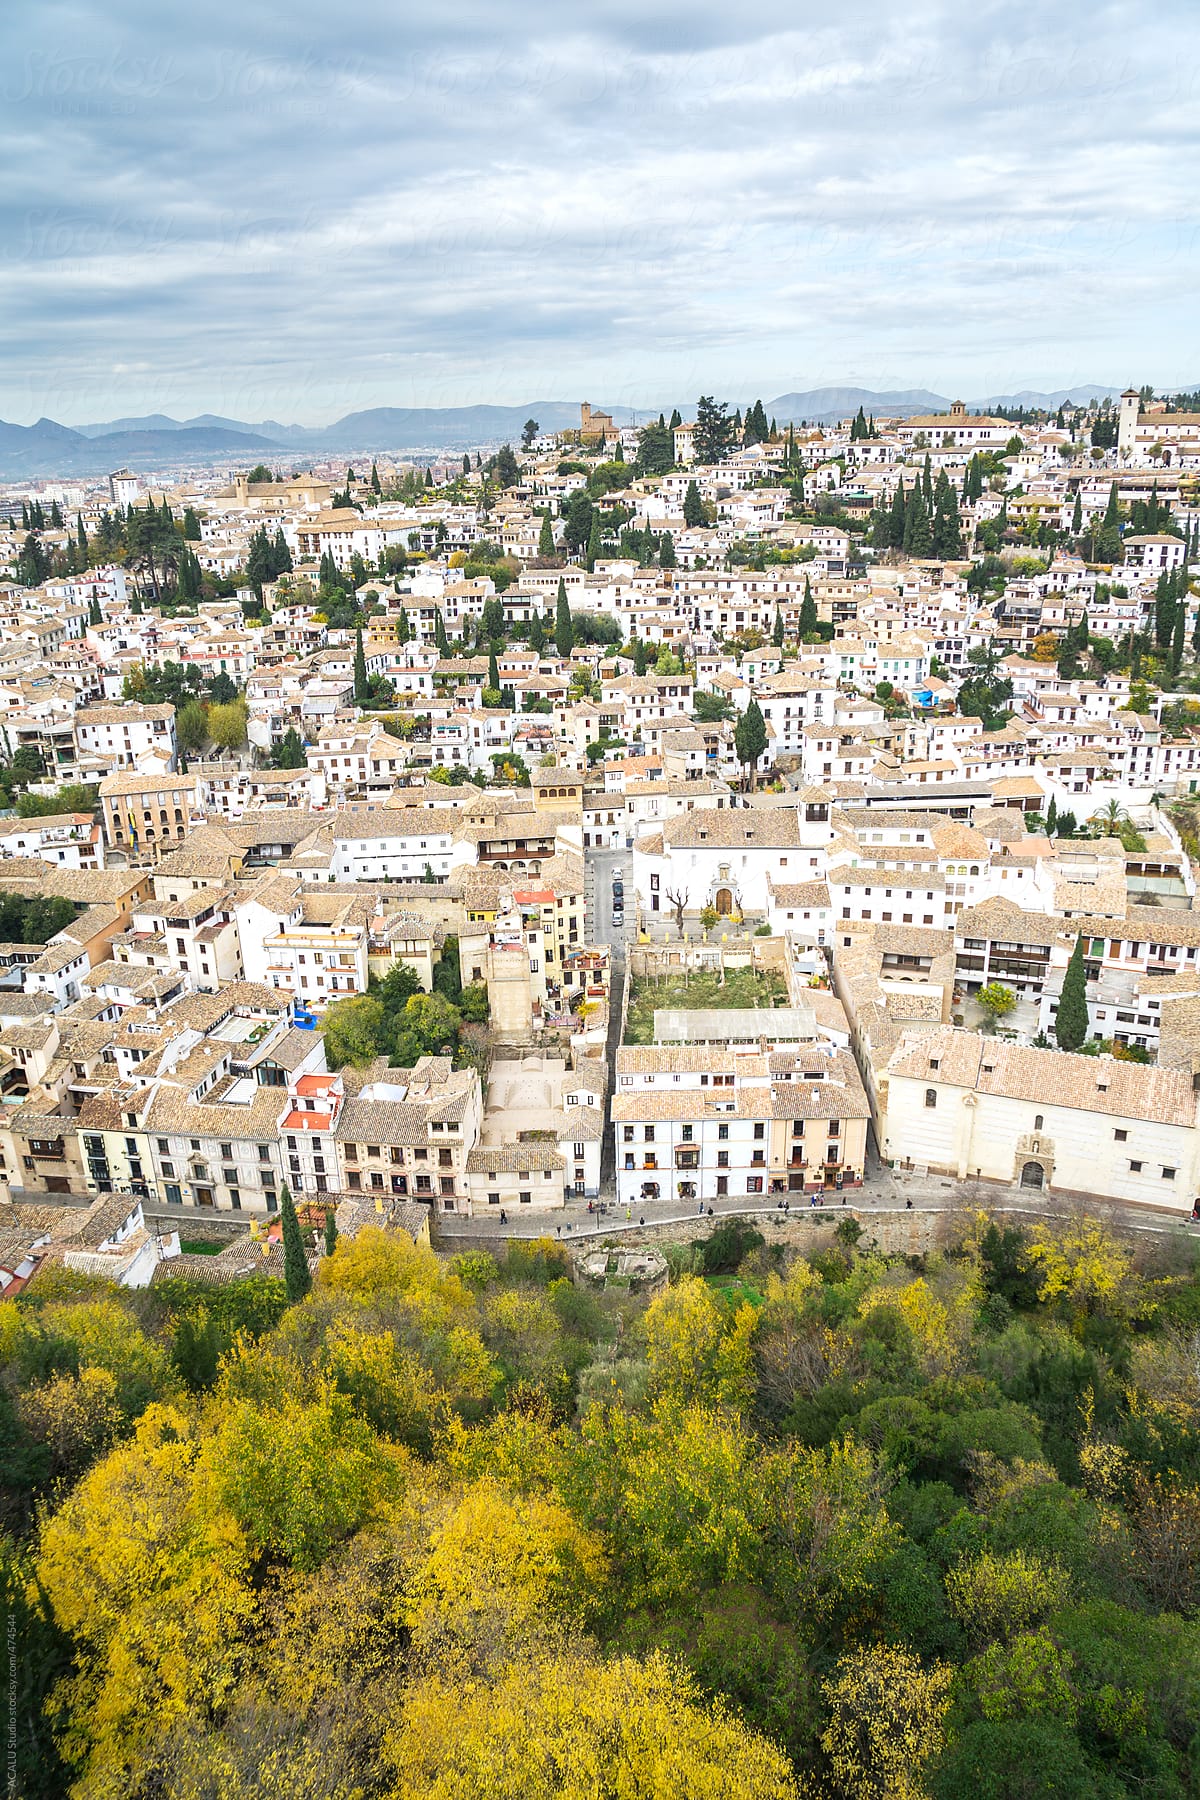 Views of Granada from the Alhambra